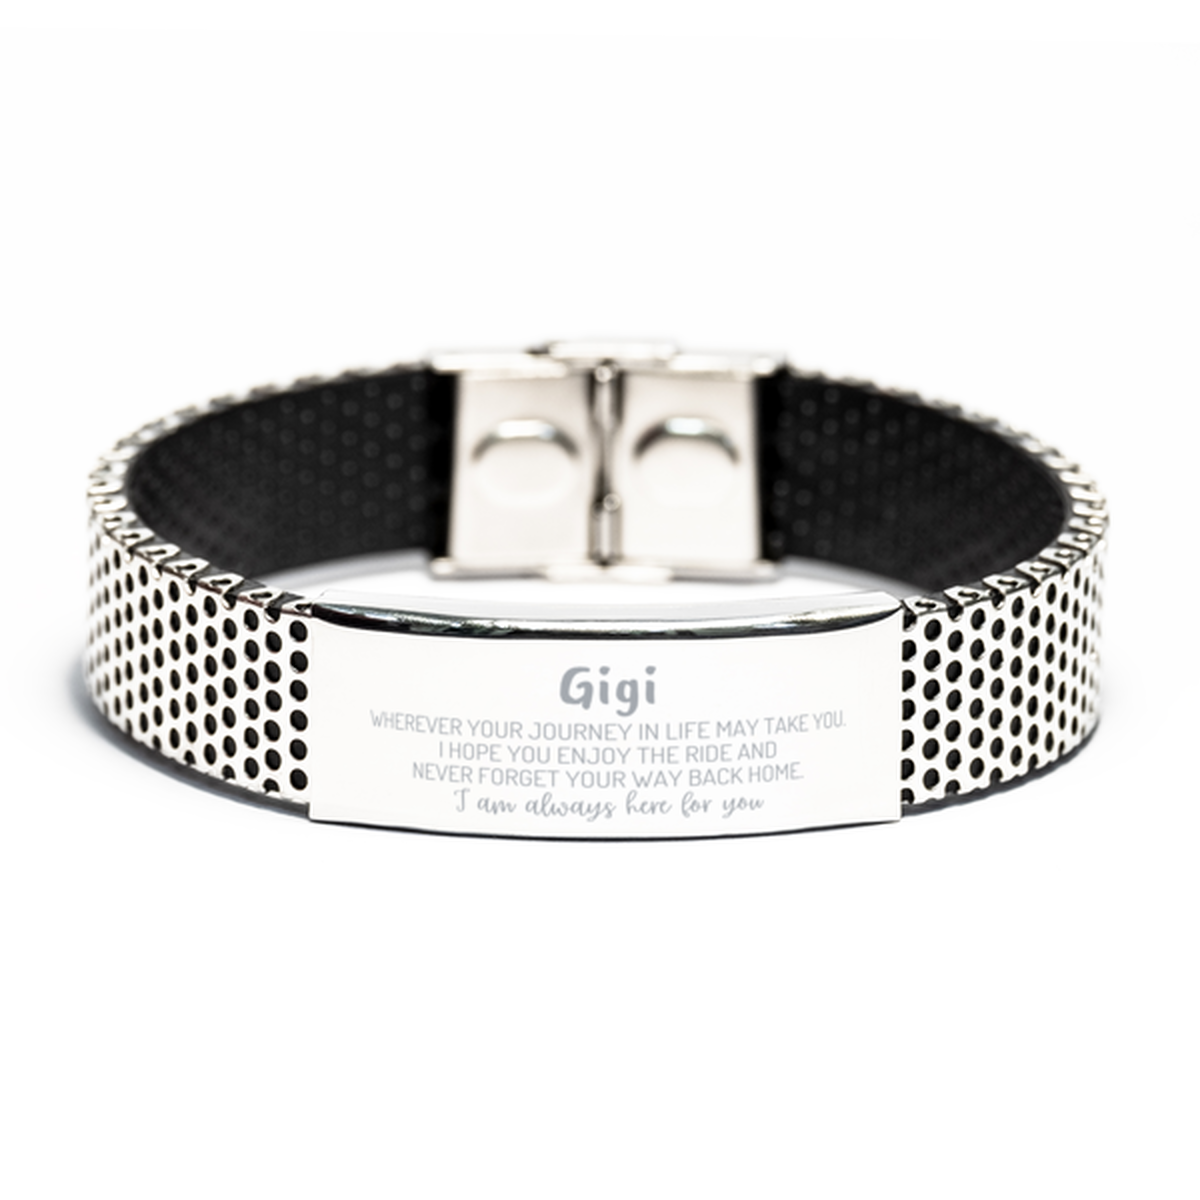 Gigi wherever your journey in life may take you, I am always here for you Gigi Stainless Steel Bracelet, Awesome Christmas Gifts For Gigi, Gigi Birthday Gifts for Men Women Family Loved One